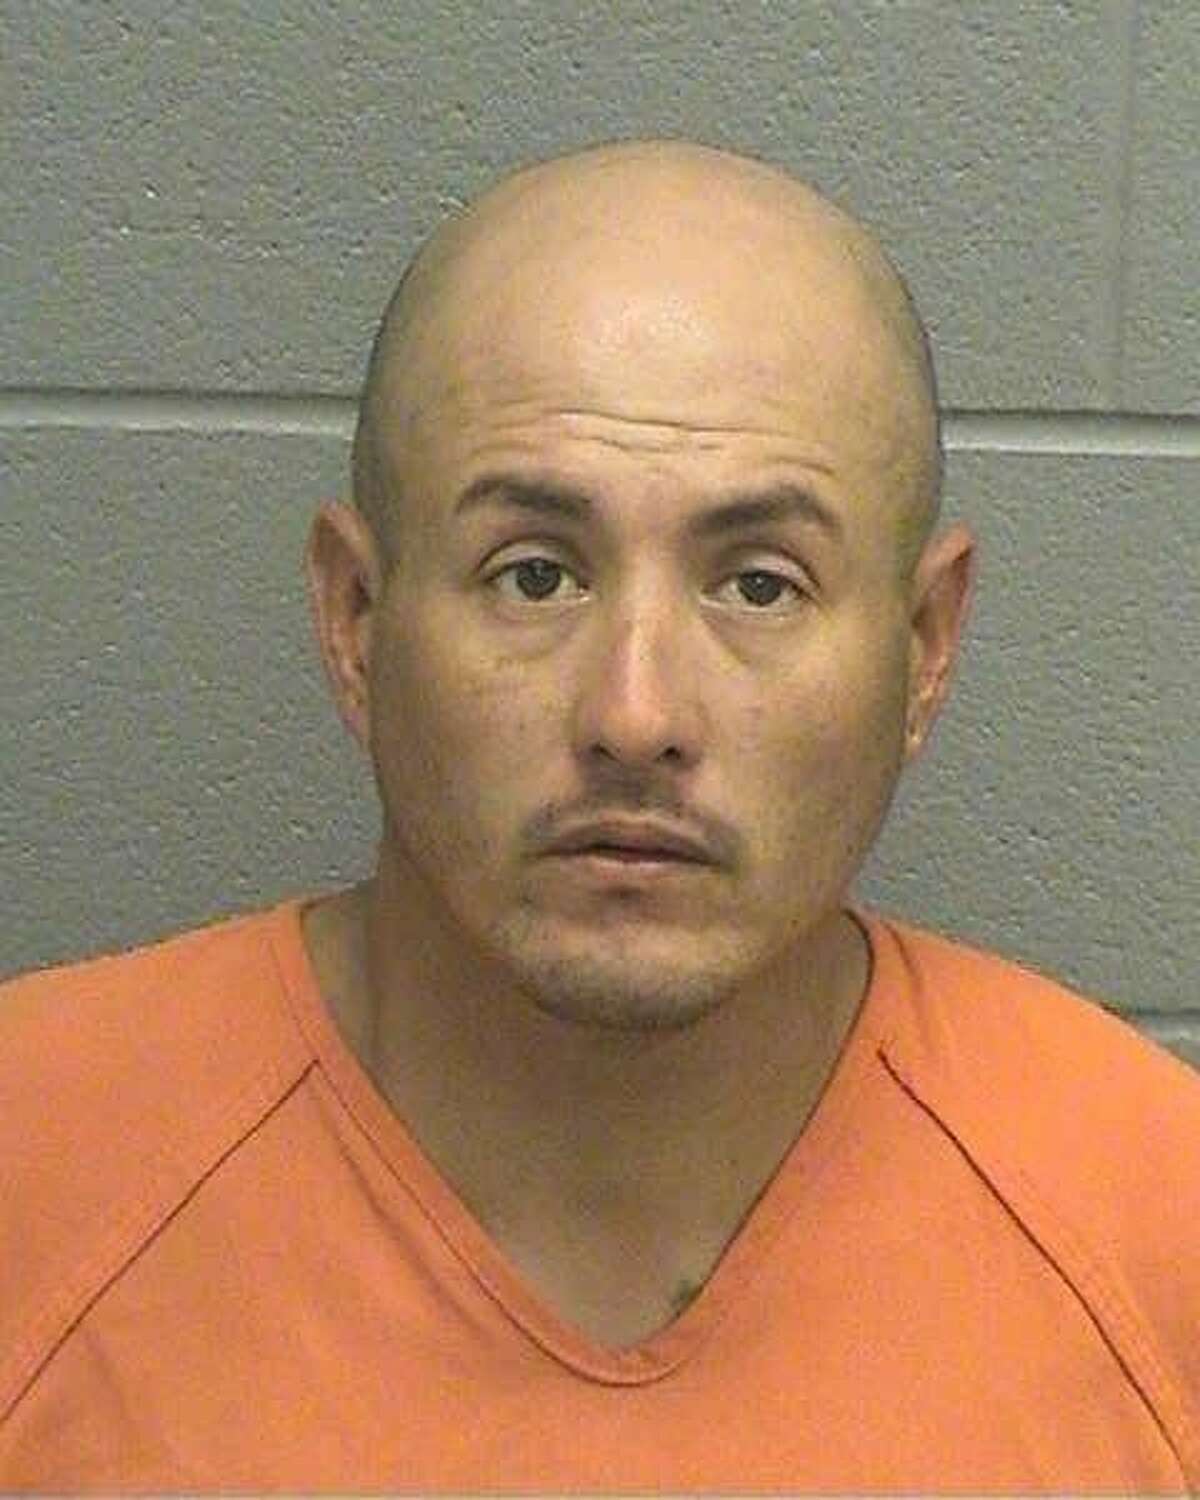 Ernesto Jaramillo Aranda, 37, was charged with a first-degree felony of aggravated assault of a household member with a weapon. He was being held Oct. 19 on a $75,000 bond. Police responded to an assault late Friday on the 1200 block of East Pecan Street. Police saw Aranda -- who matched the description of the person involved in the disturbance -- traveling westbound with “blood covering his hands and elbows,” according to the arrest affidavit.